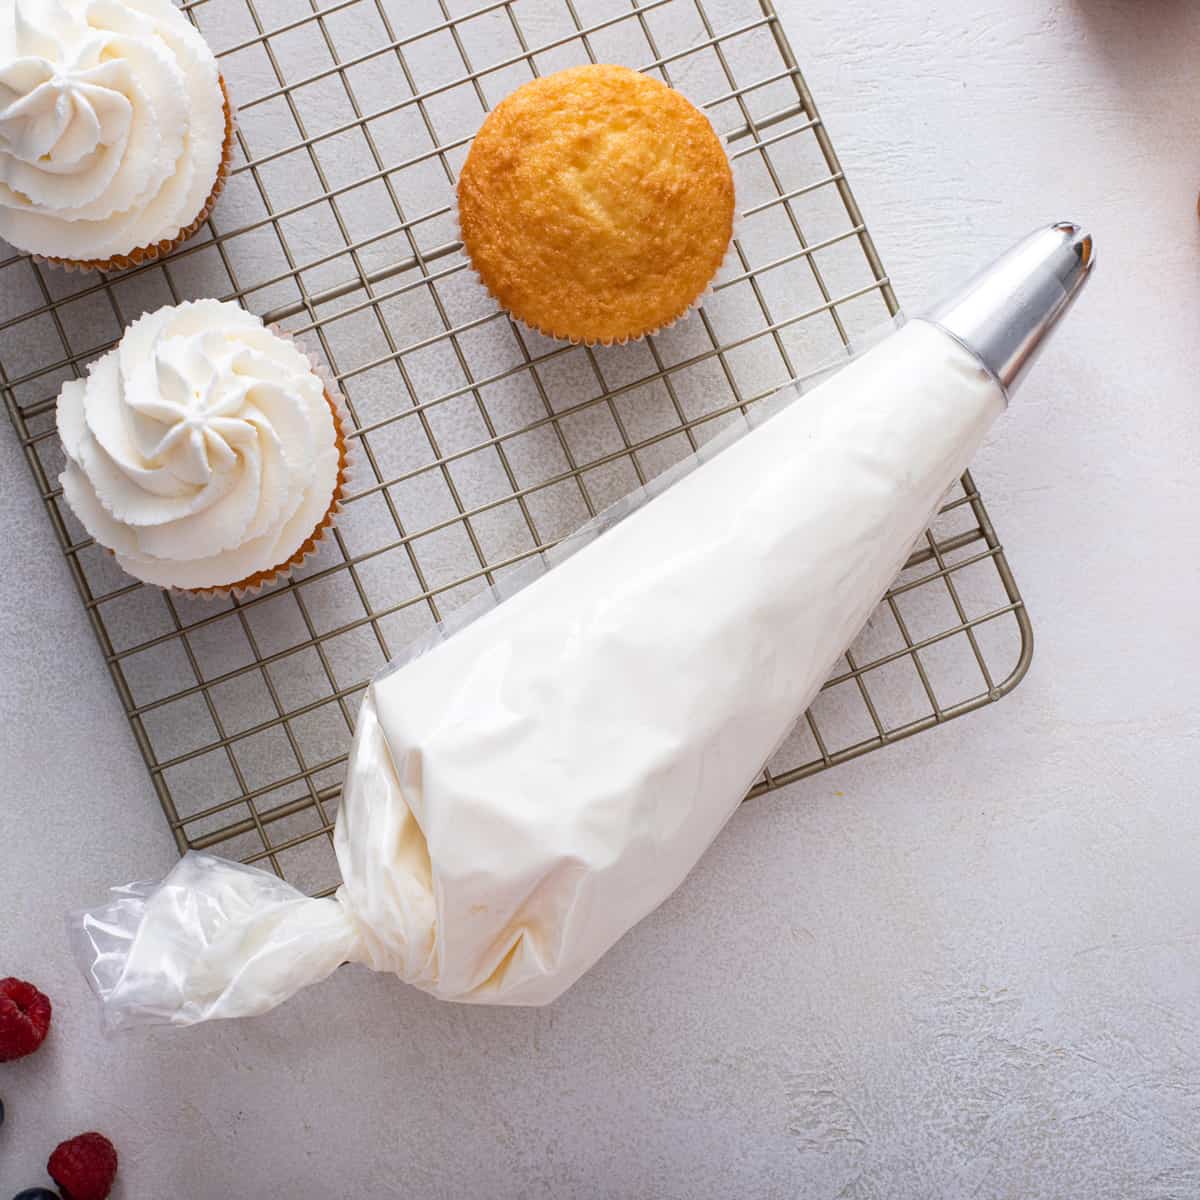 Stabilizing Whipped Cream – Nutrition and Food Safety